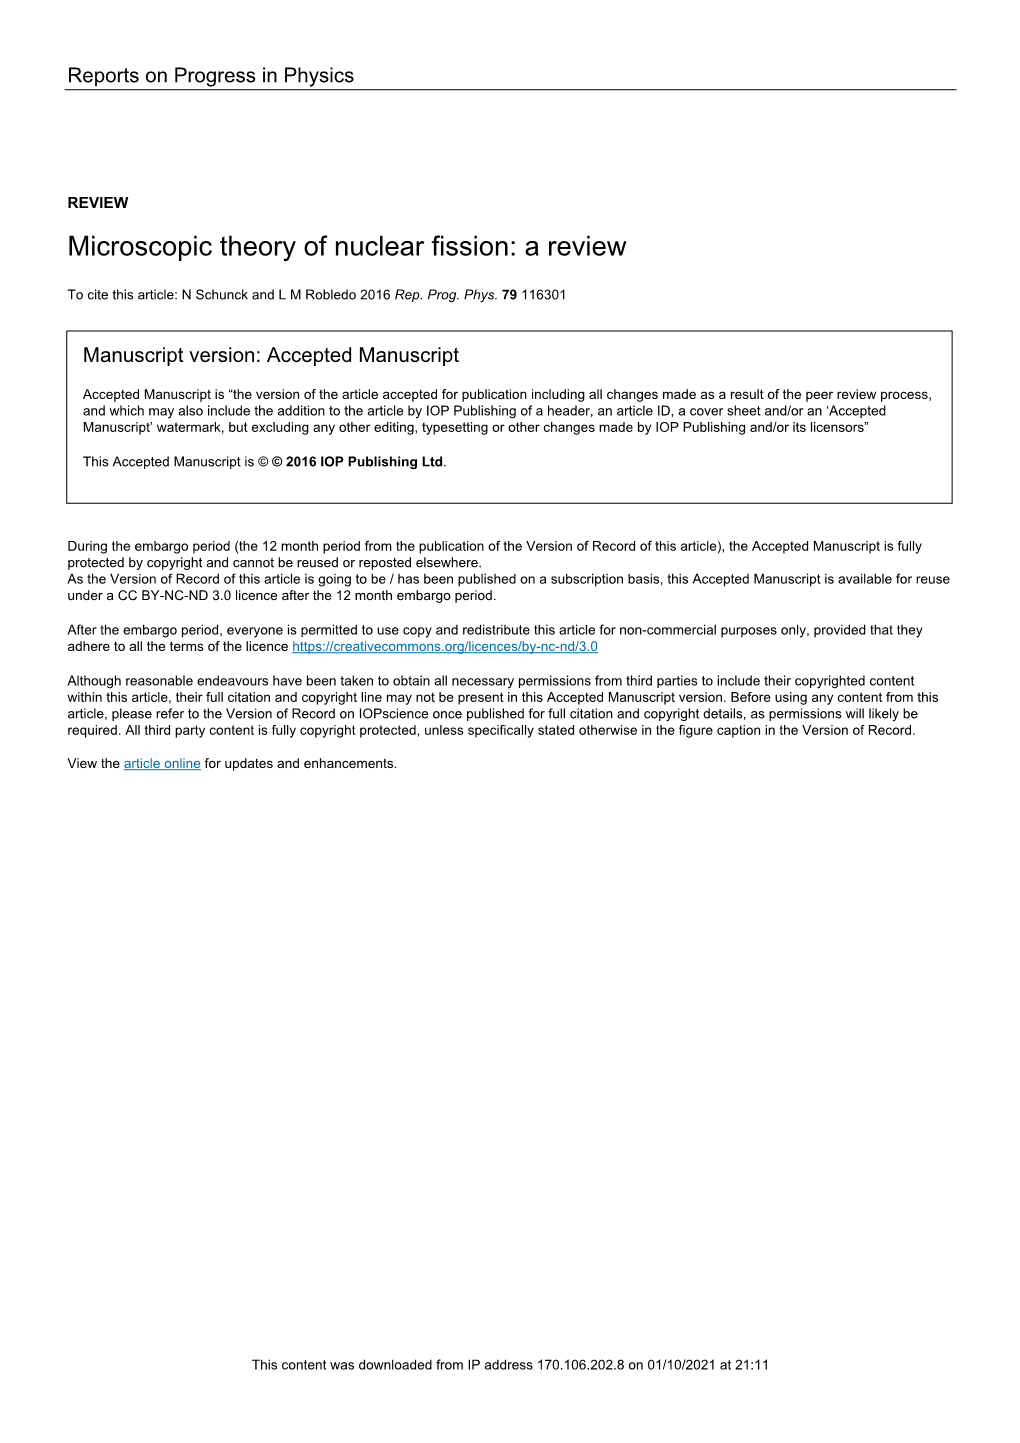 Microscopic Theory of Nuclear Fission: a Review